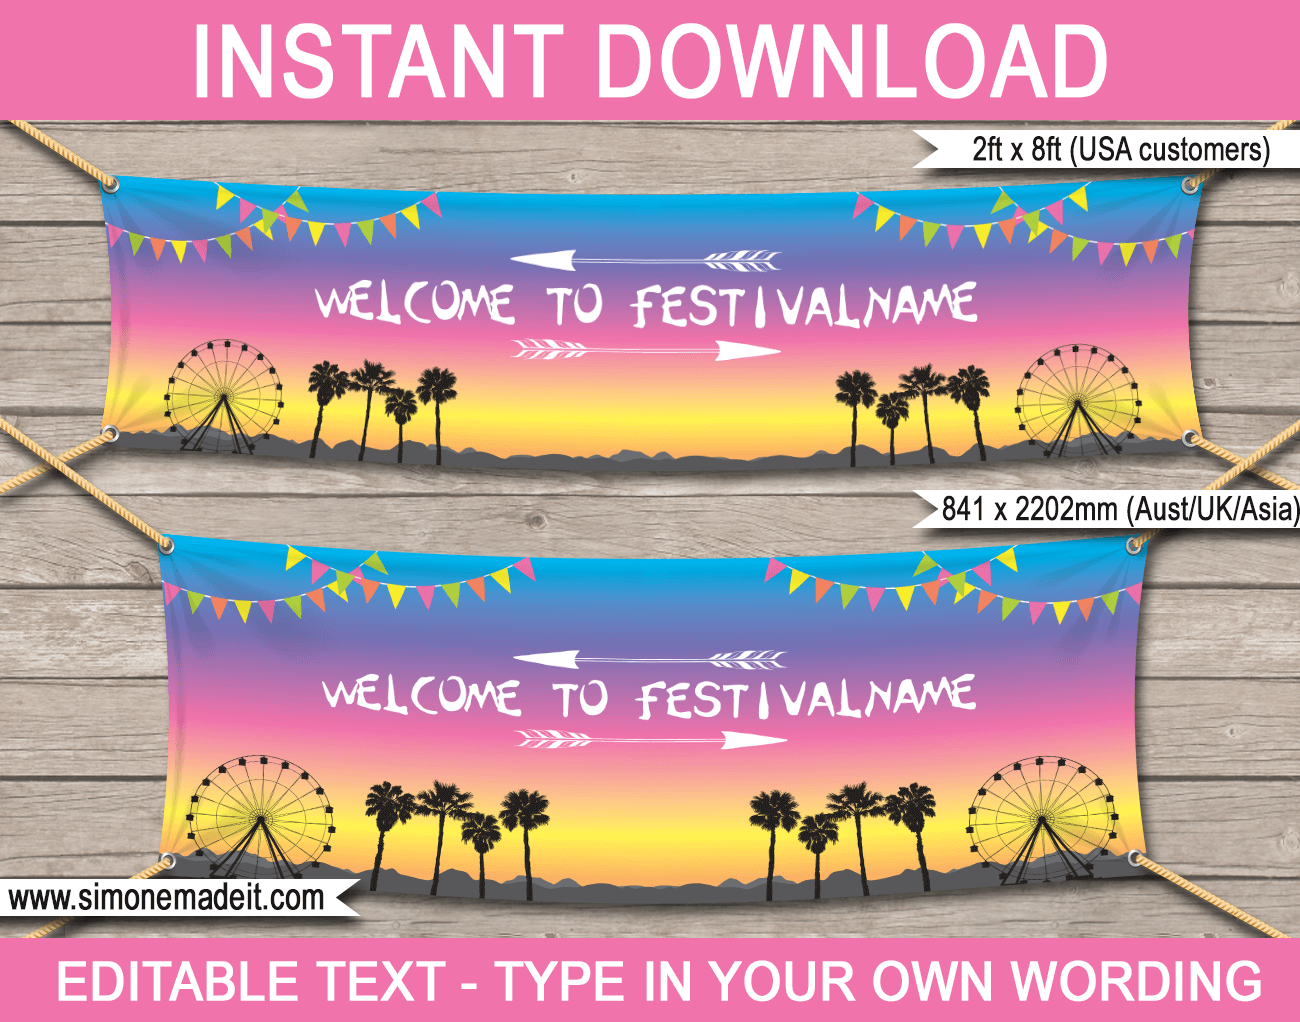 Printable Coachella Party Welcome Banner | Large Size | Outdoor Sign | Festival Party Decorations | Birthday Party Theme | Kidchella, Festival, Fete, Gala, Fair, Carnival | Editable DIY Template | INSTANT DOWNLOAD via SIMONEmadeit.com